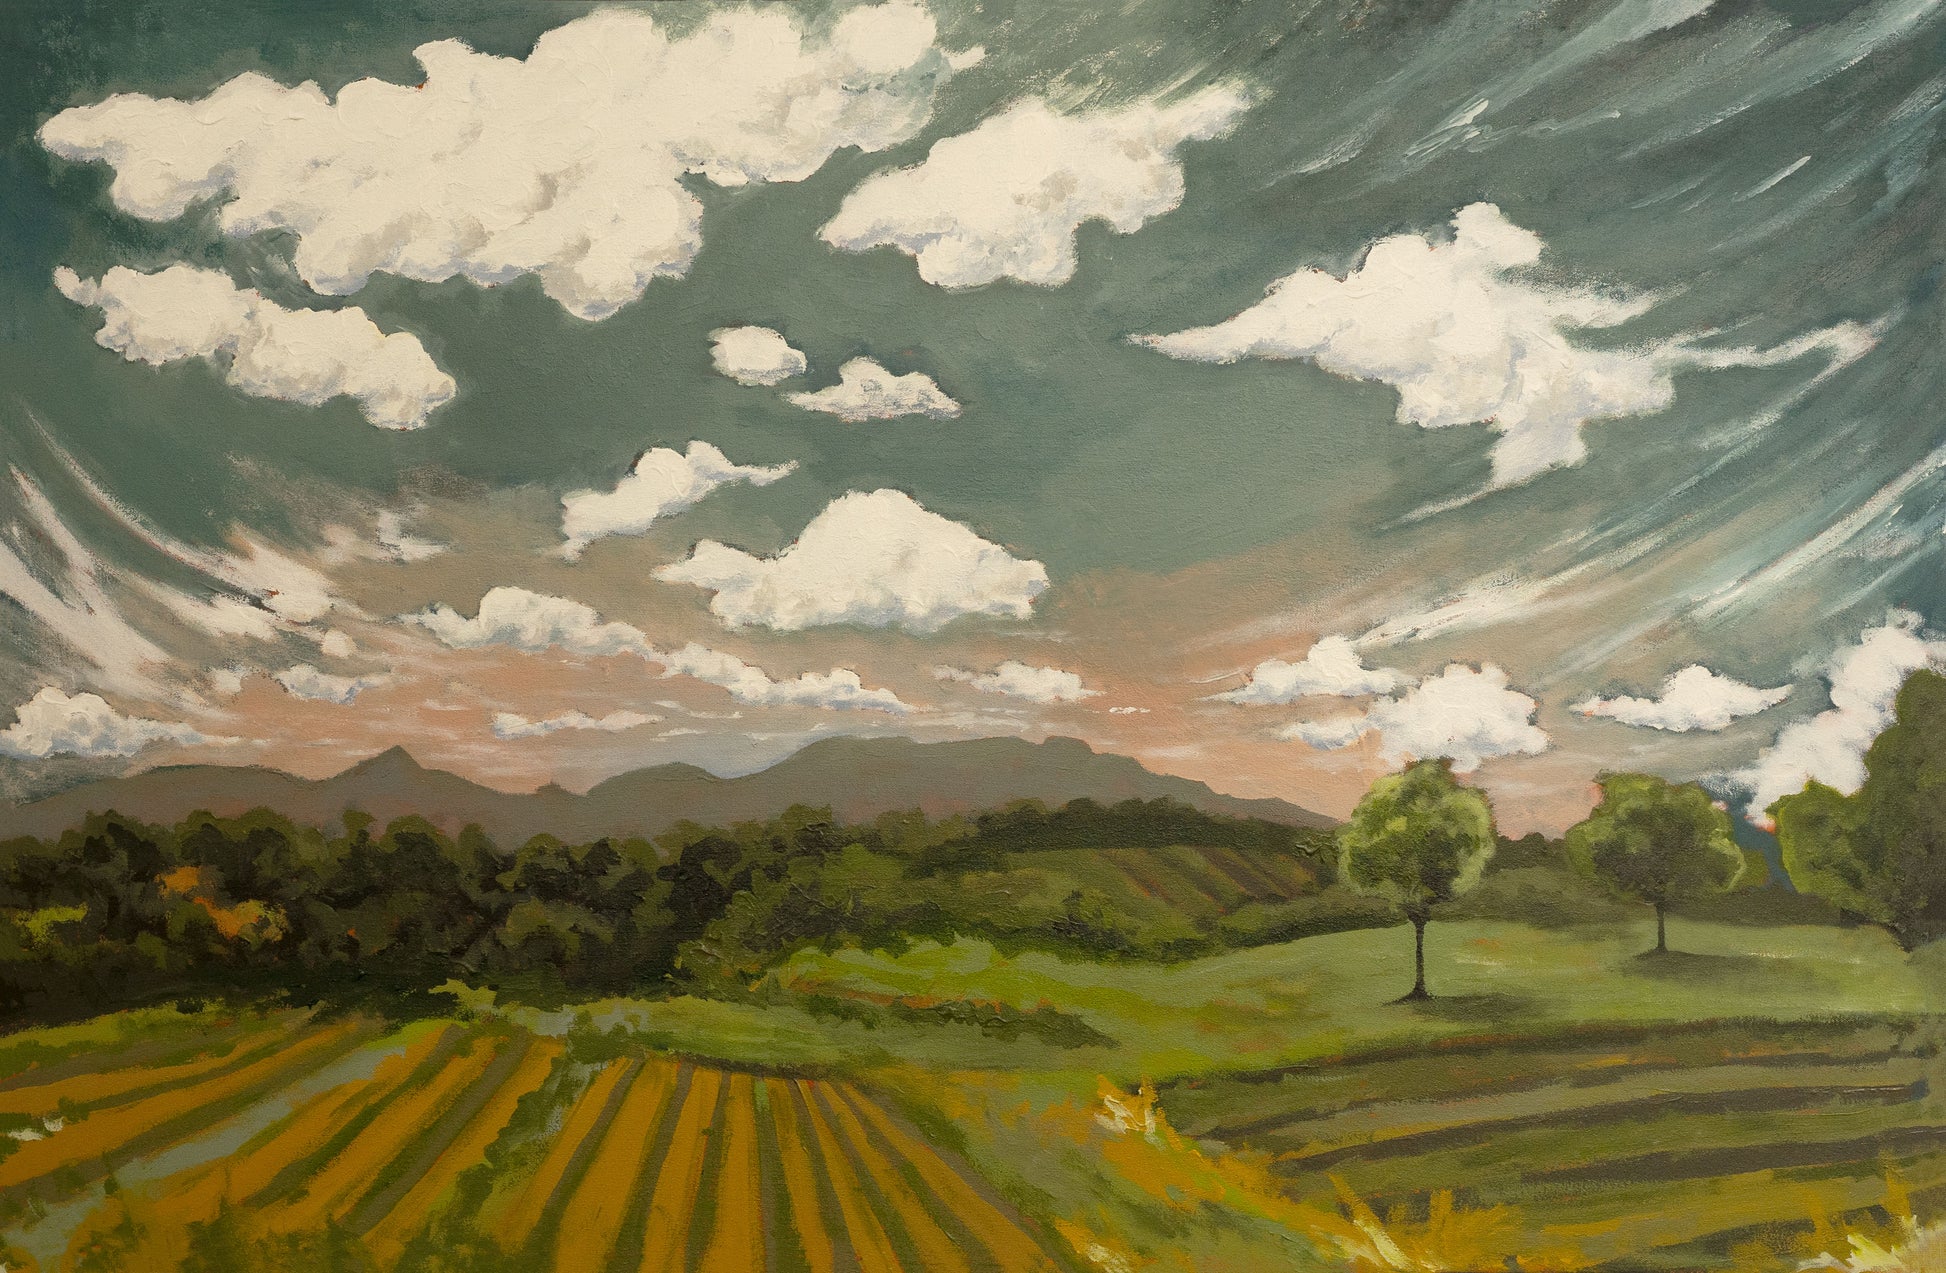 Painting of farm fields, foothills in South Carolina, hogback mountain, and fluffy clouds in a pink and blue ski